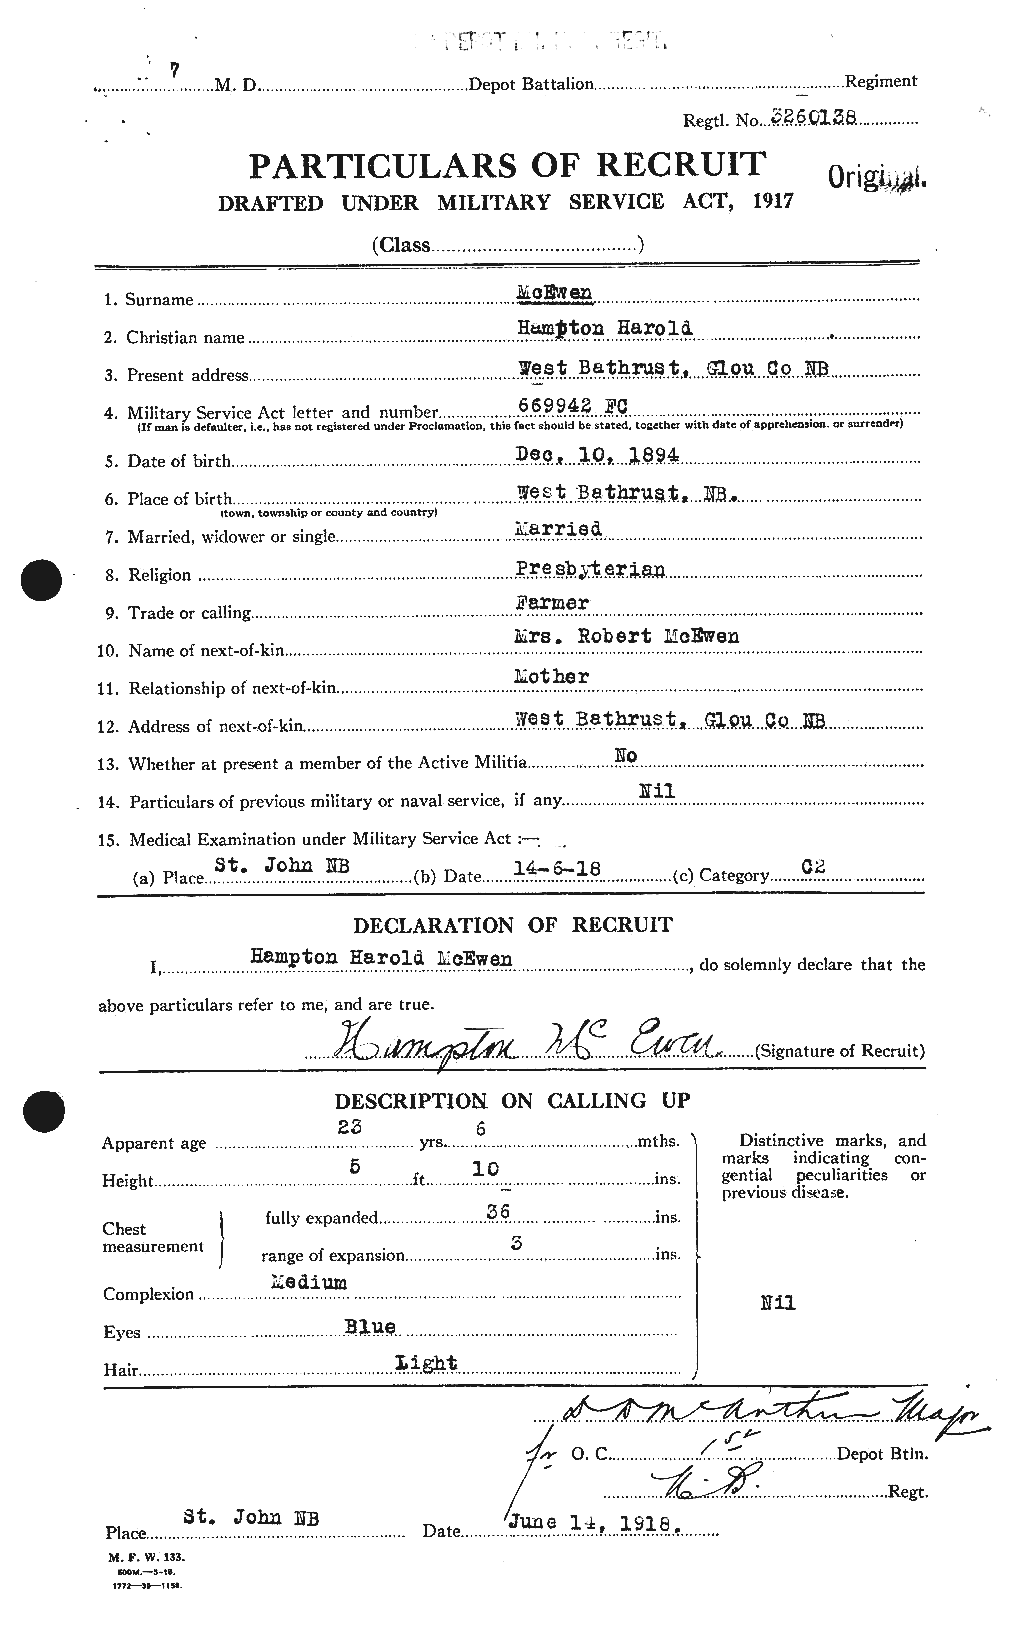 Personnel Records of the First World War - CEF 520929a